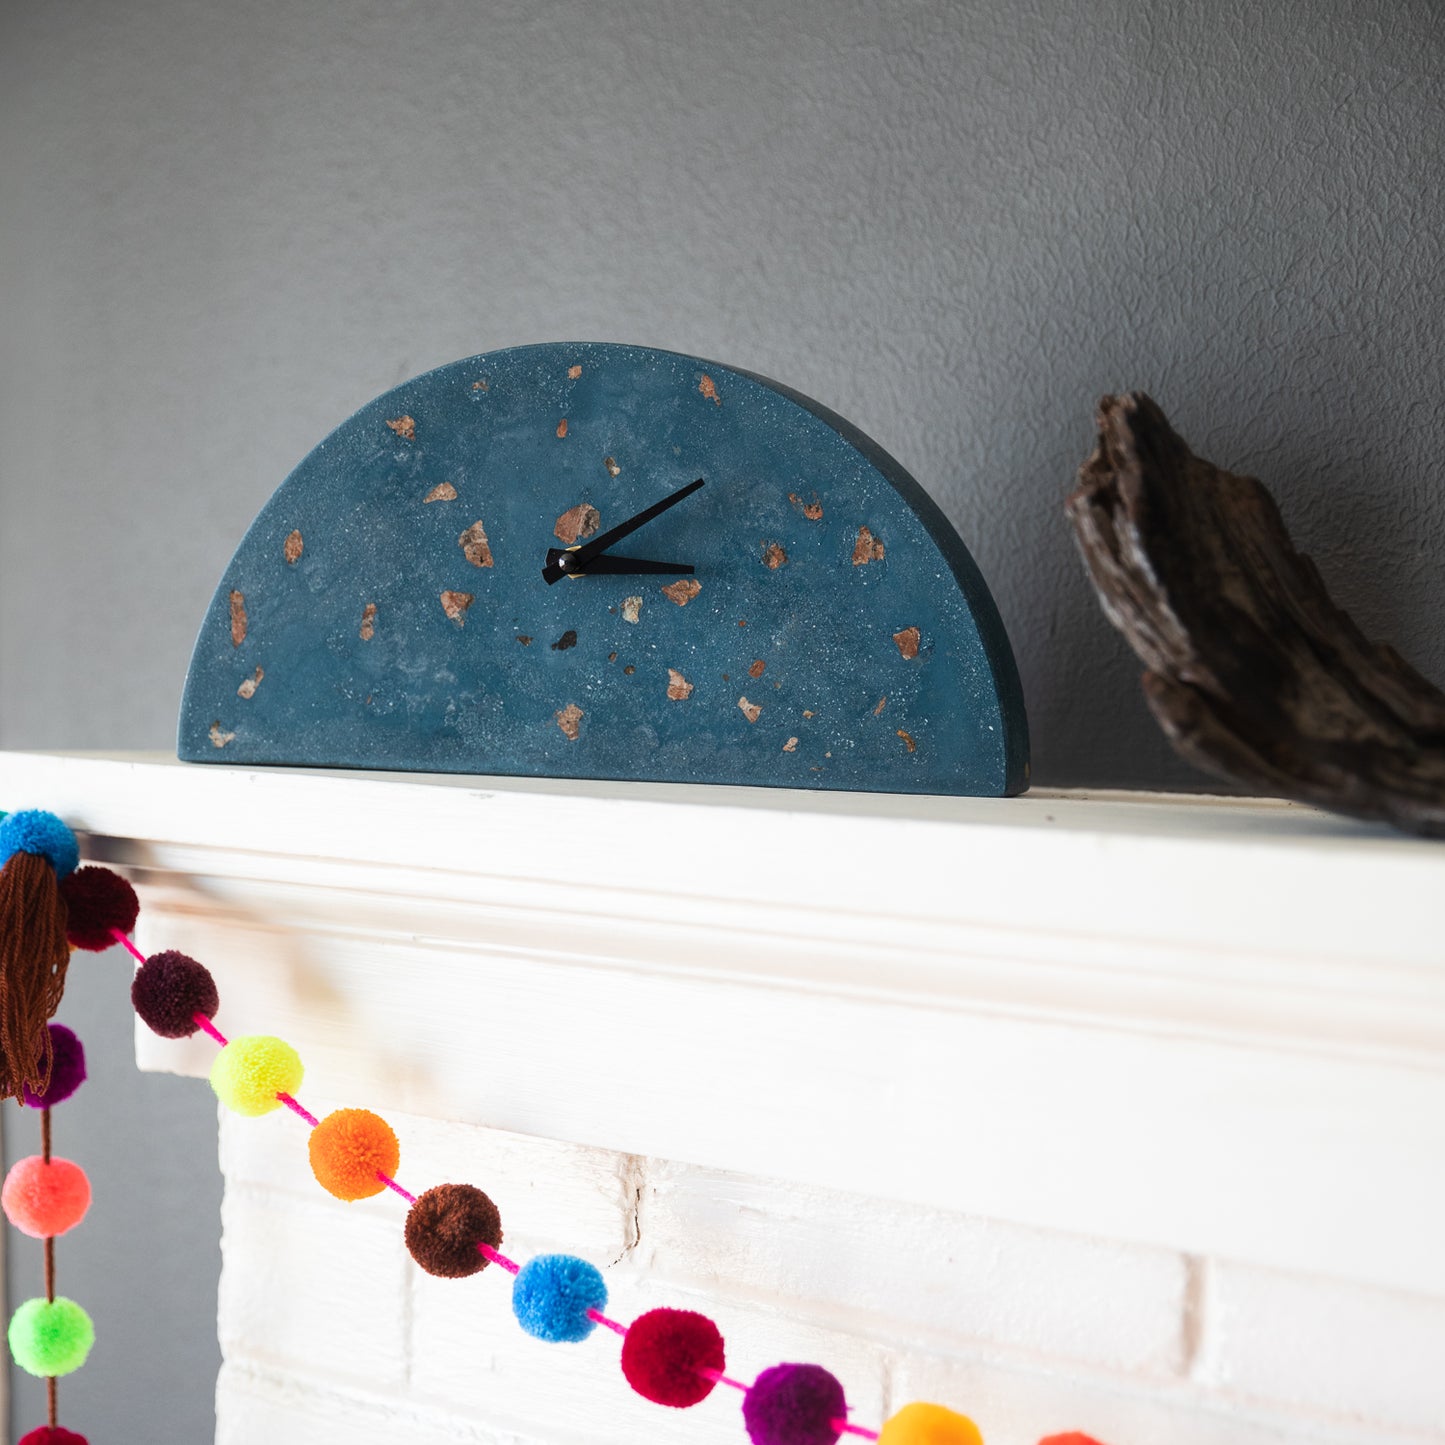 The cobalt terrazzo mantel clock, styled on a mantel.